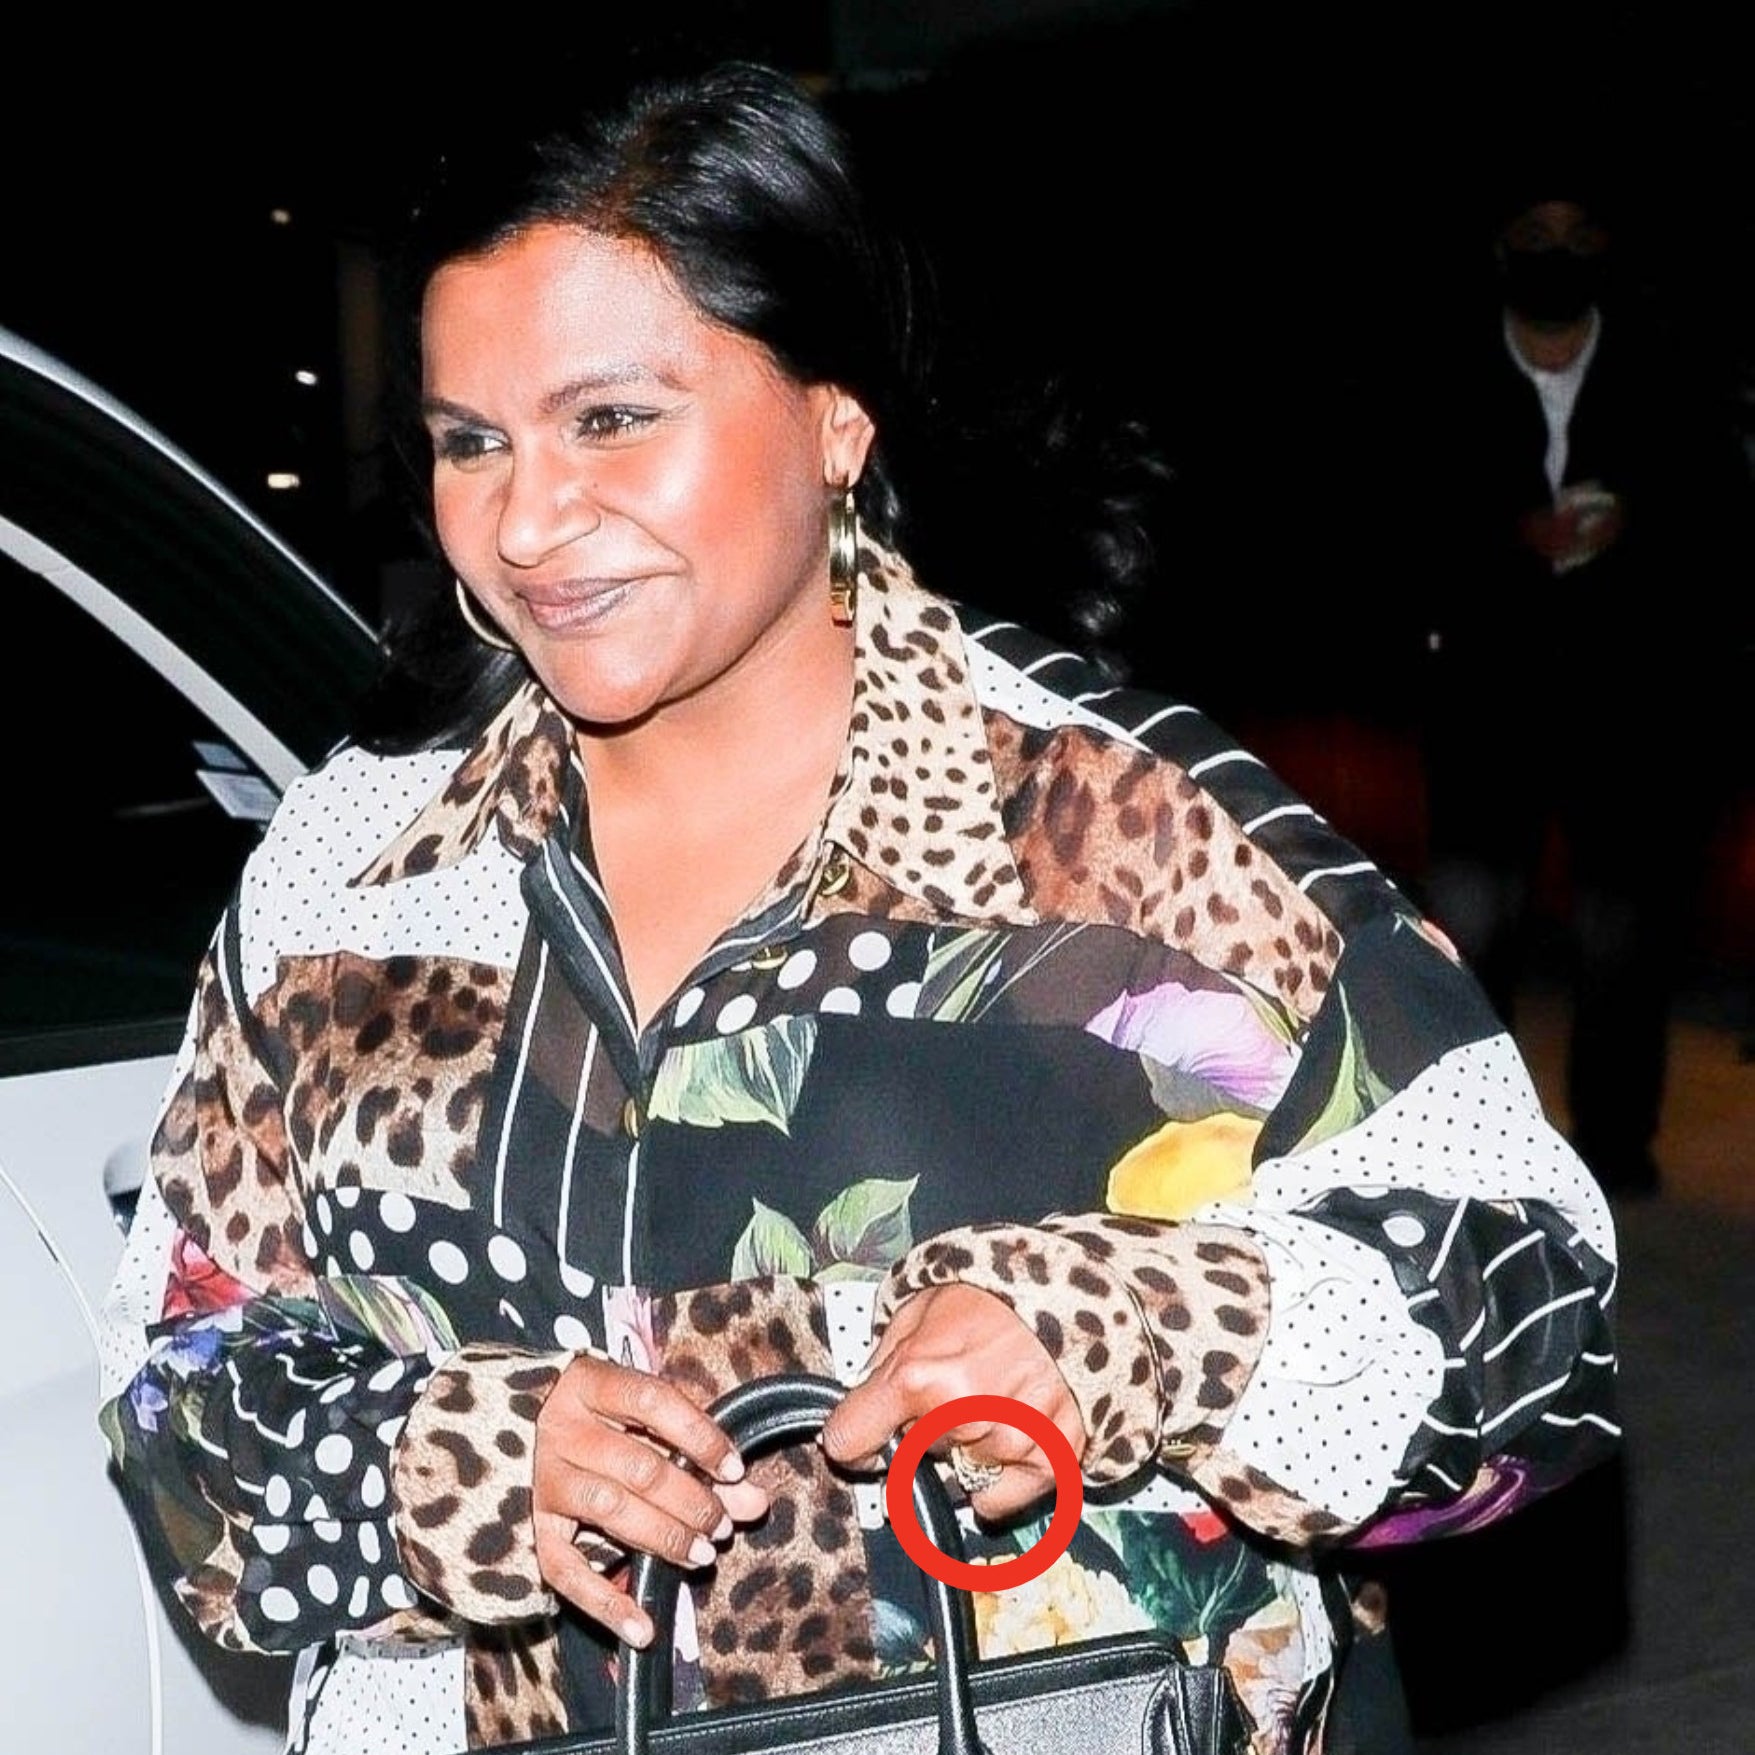 A smiling Mindy Kaling is in good spirits after grabbing a bite at Giorgio Baldi in Santa Monica